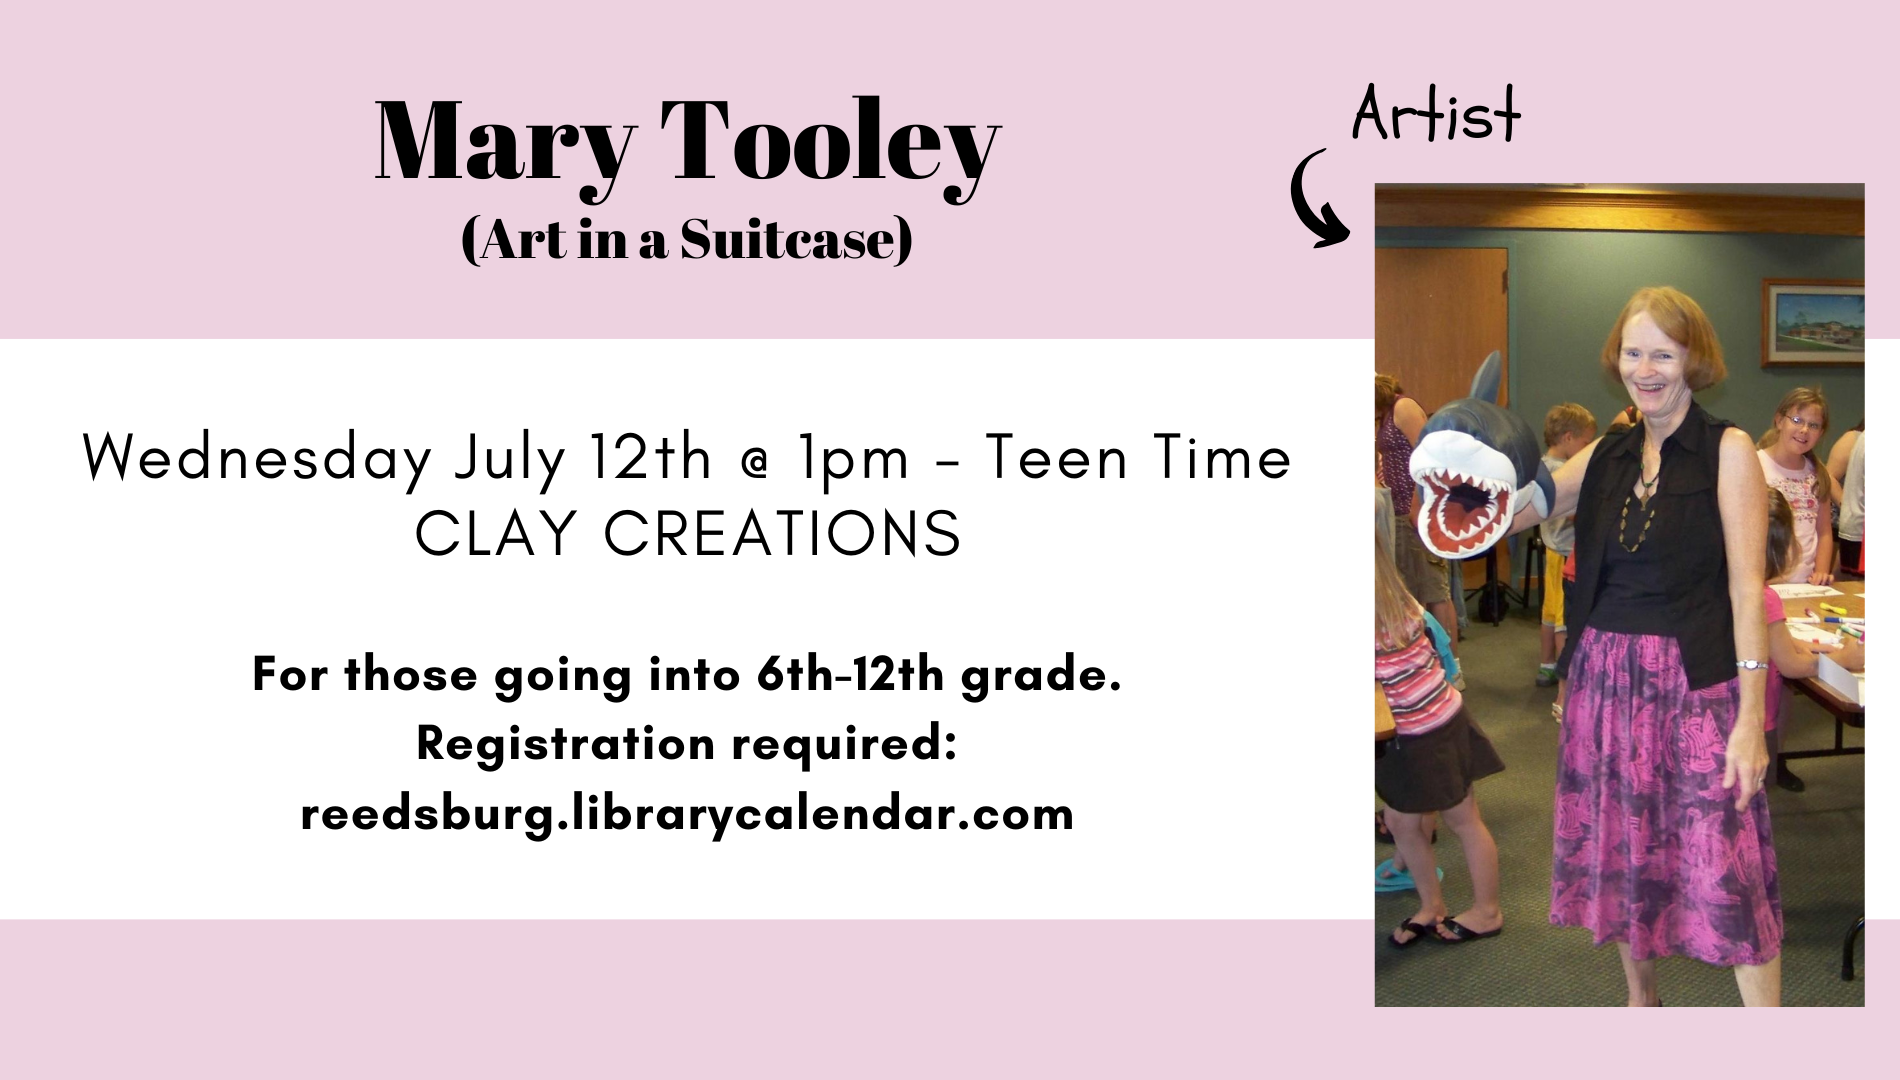 Registration required for this clay Teen Time program with Mary Tooley.